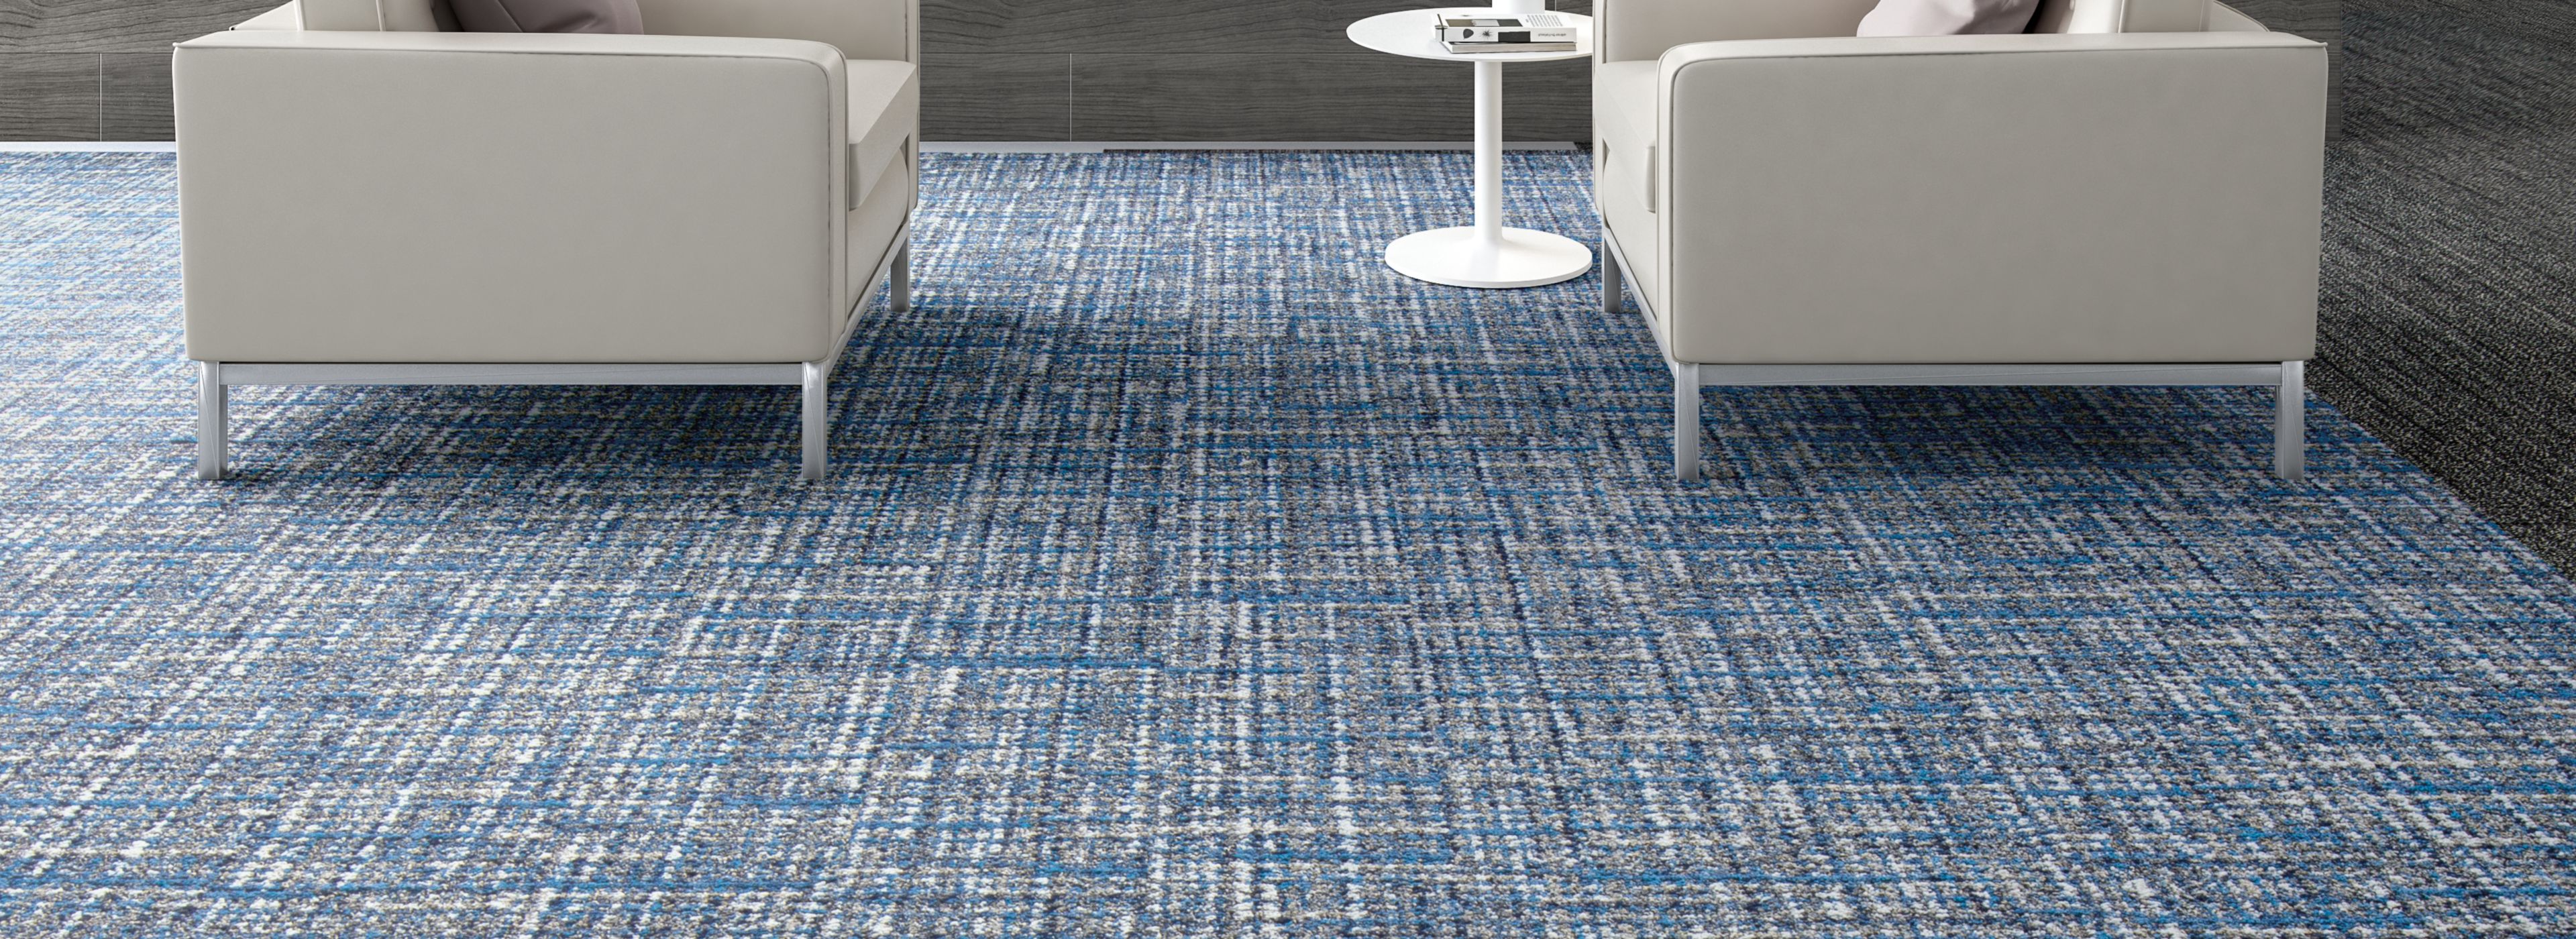 Interface WW895 plank carpet tile in lobby area with couches and side table  imagen número 1